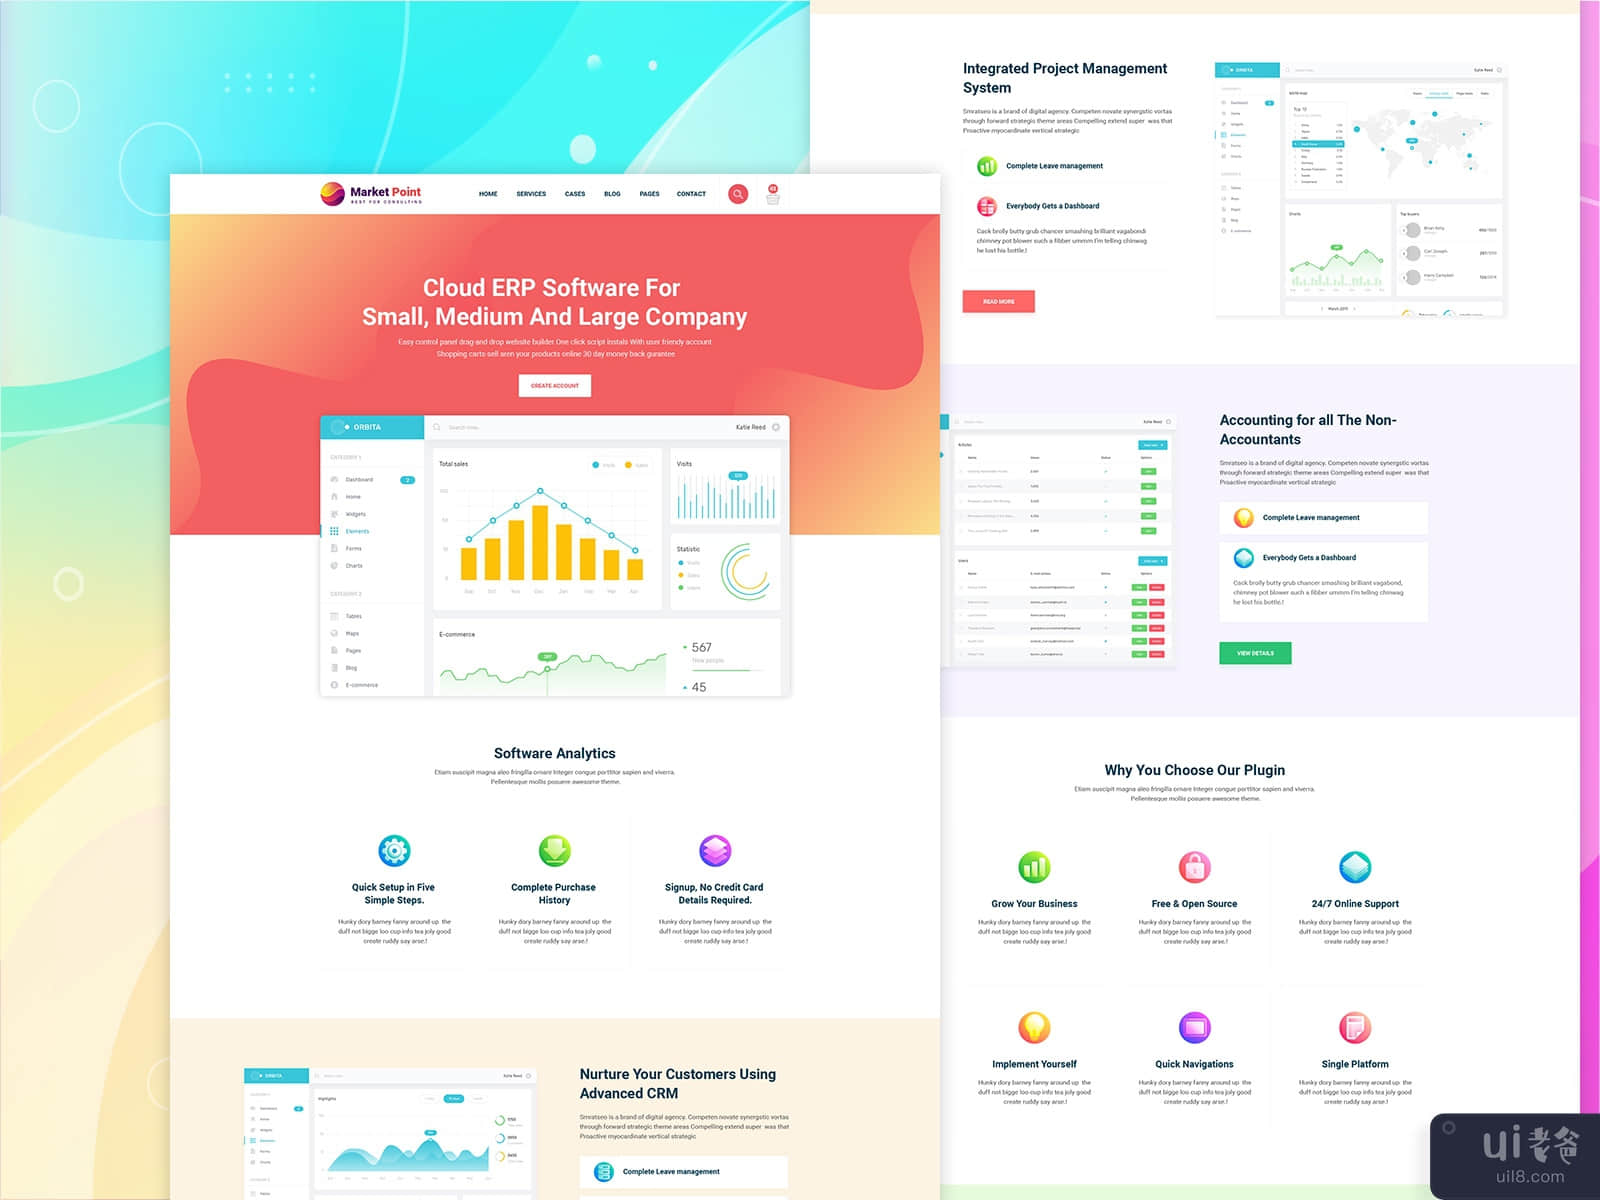 #3MarketPoint - Multipurpose Business And Agency PSD Template